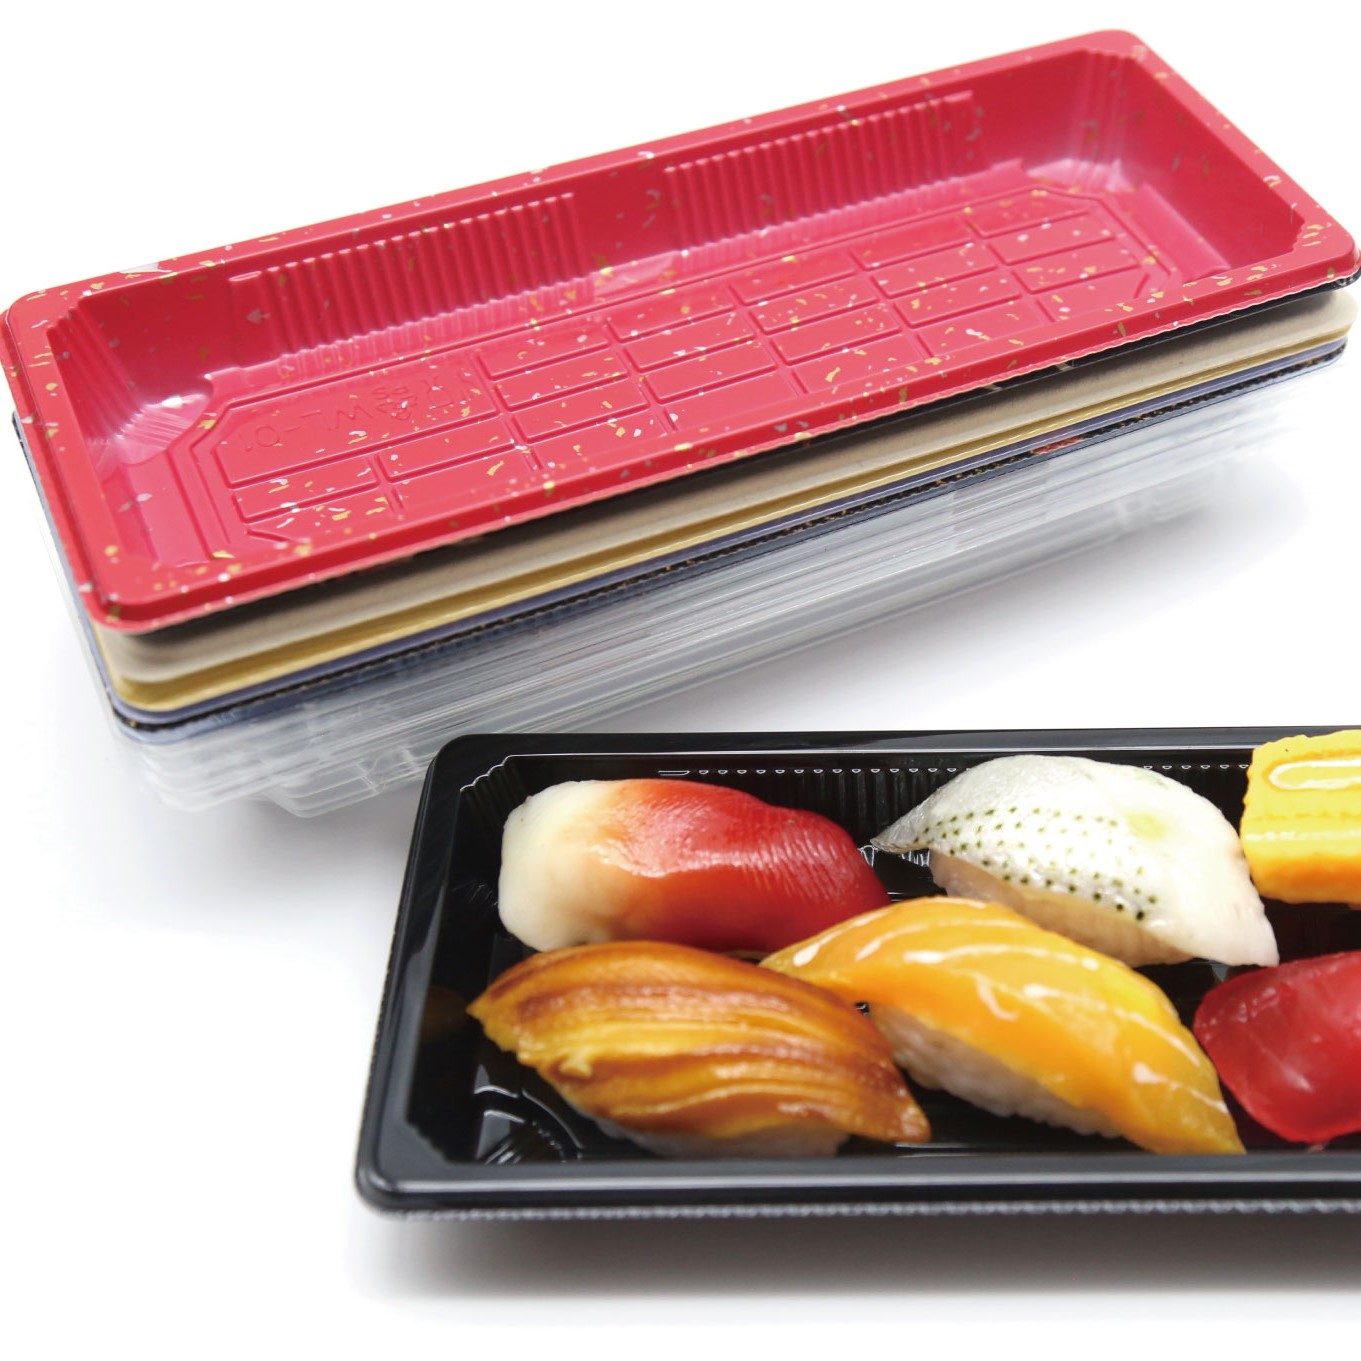 On the countertop are some sushi trays WL-01, which are stackable.